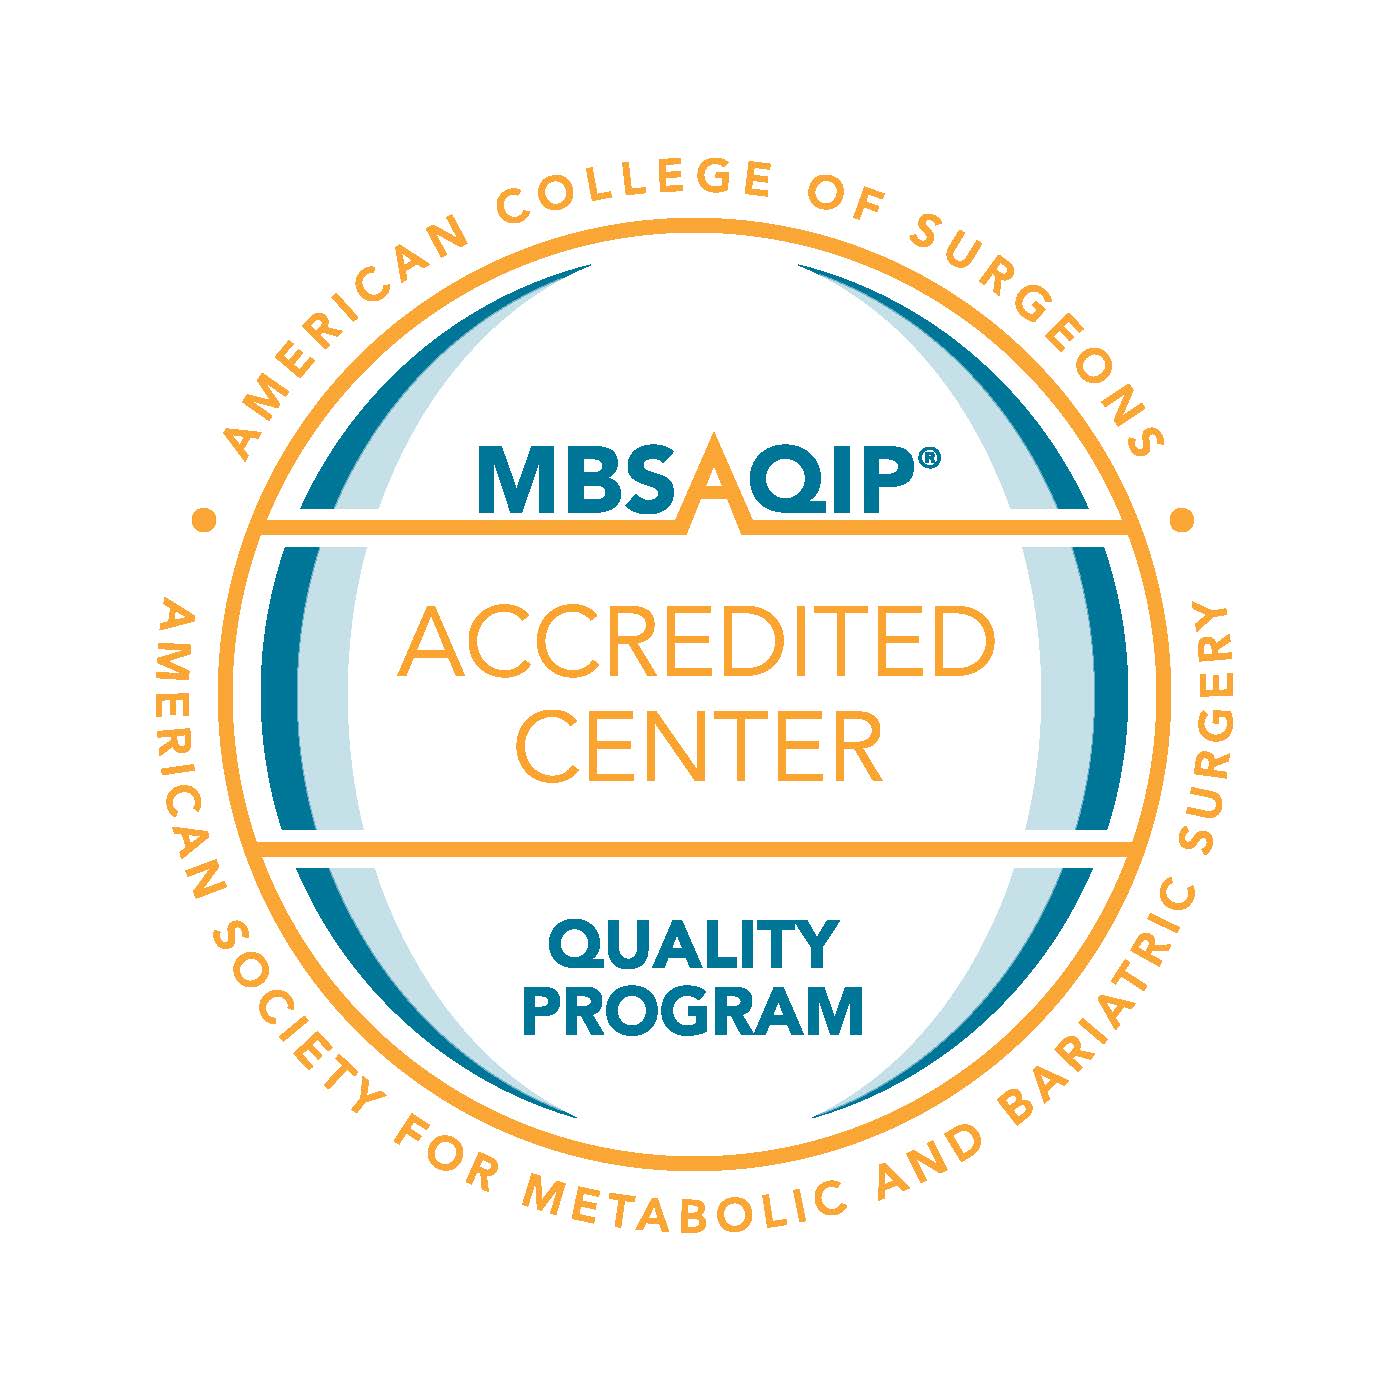 Fort Sanders Regional is accredited as a Comprehensive Center under the Metabolic and Bariatric Surgery Accreditation and Quality Improvement Program, a joint program of the American College of Surgeons and the American Society for Metabolic and Bariatric Surgery. 